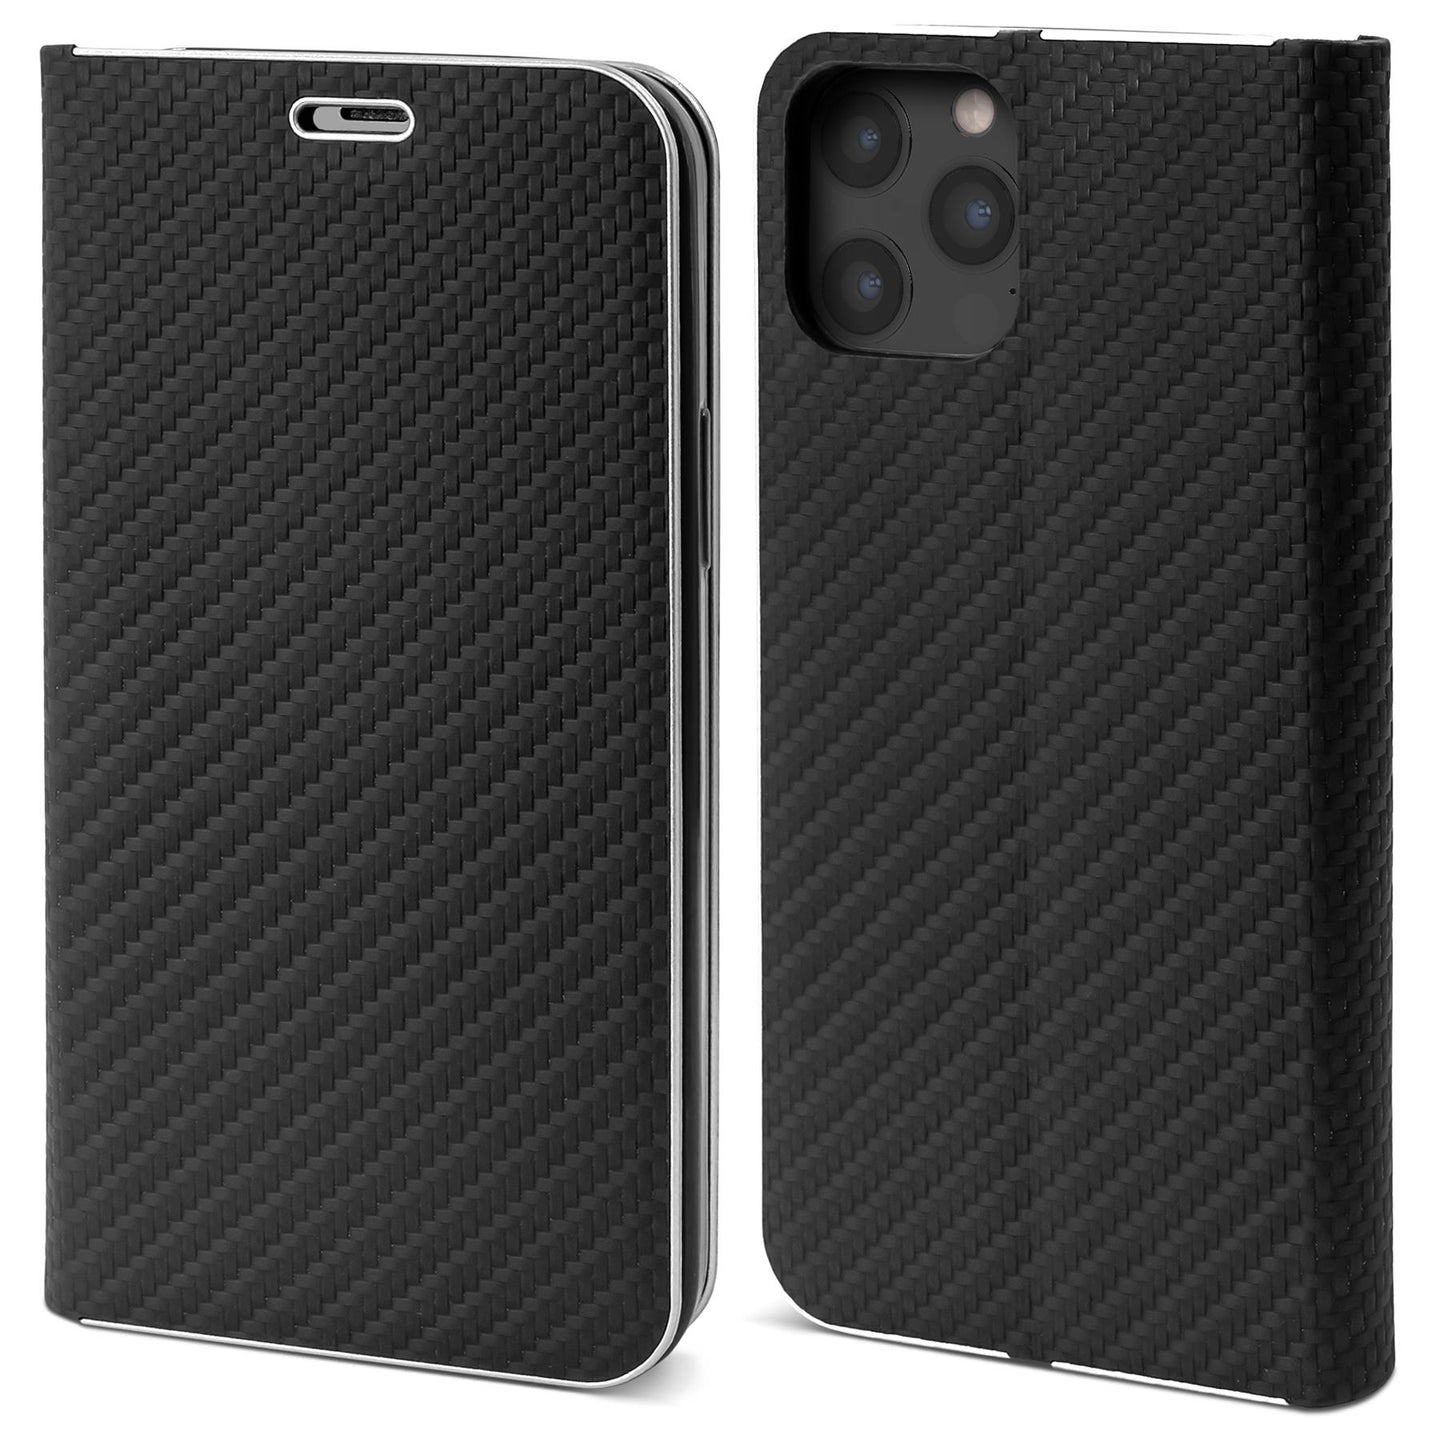 Moozy Wallet Case for iPhone 12 Pro Max, Black Carbon – Metallic Edge Protection Magnetic Closure Flip Cover with Card Holder